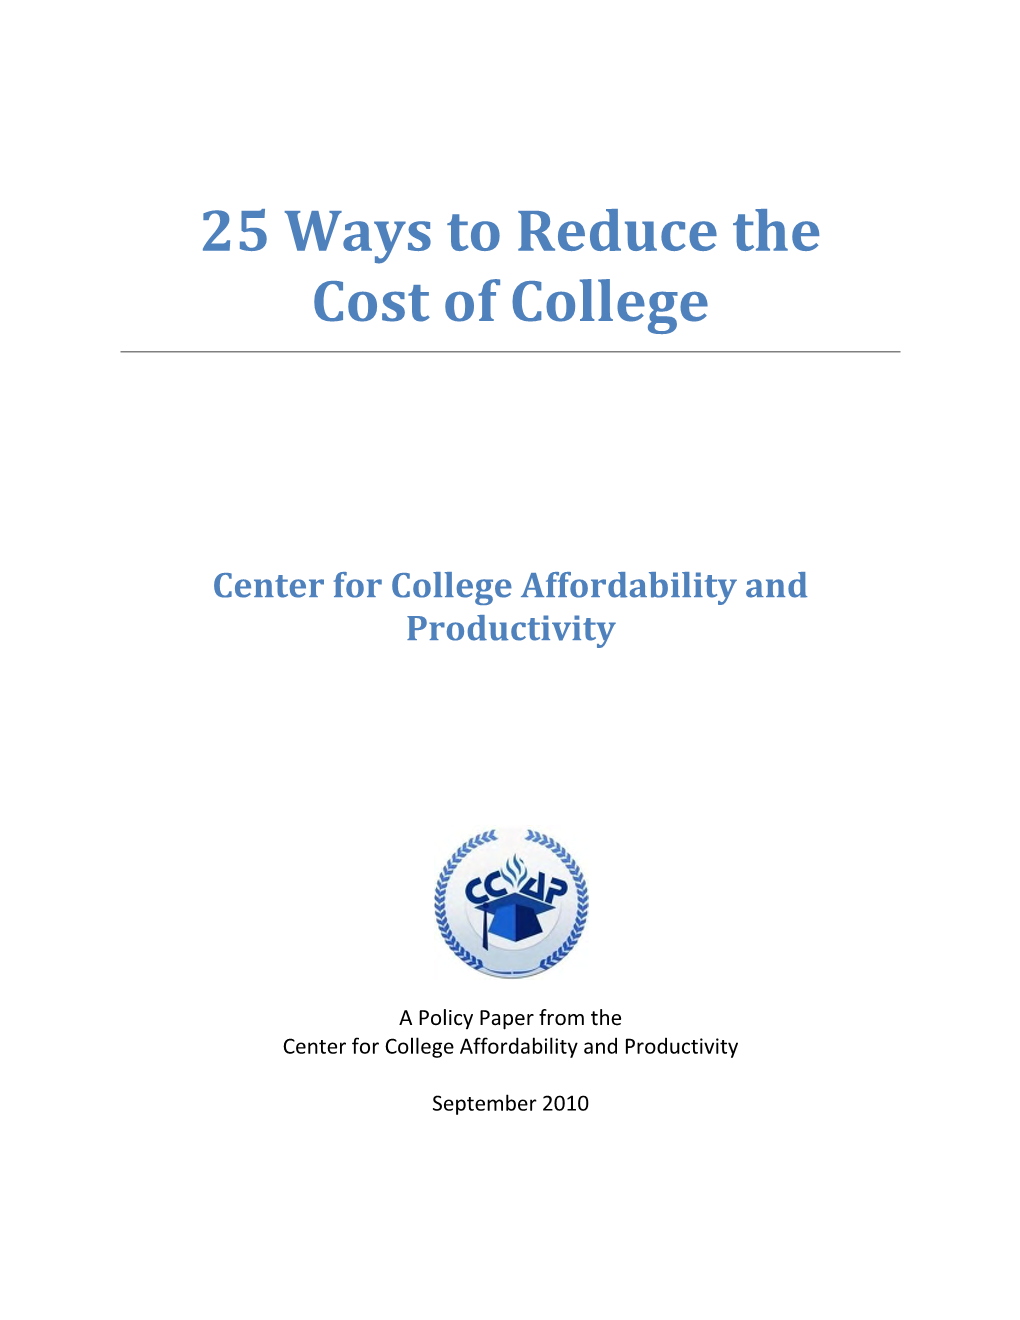 25 Ways to Reduce the Cost of College